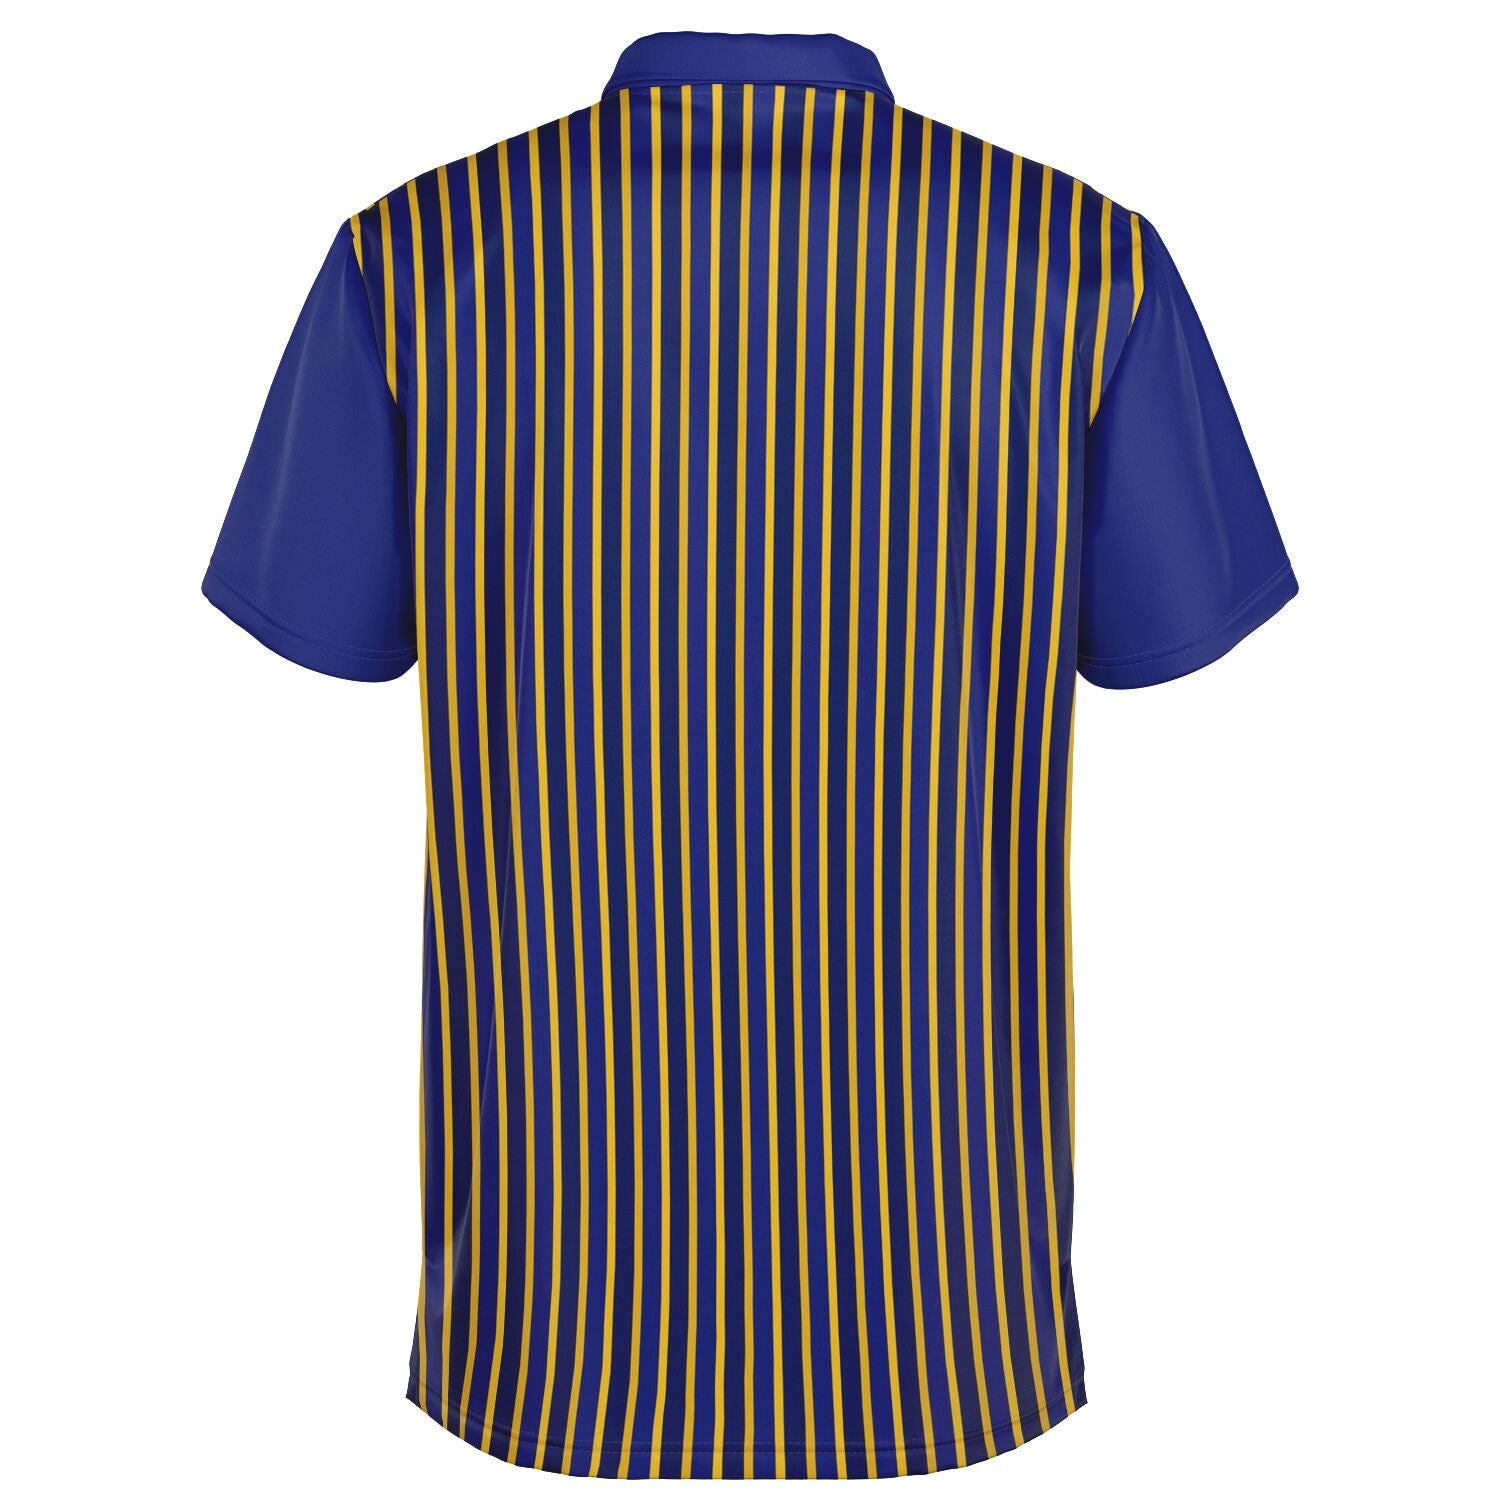 Performance Golf Polo, Gold and Navy Stripe, Sports Sweat Wicking Polo